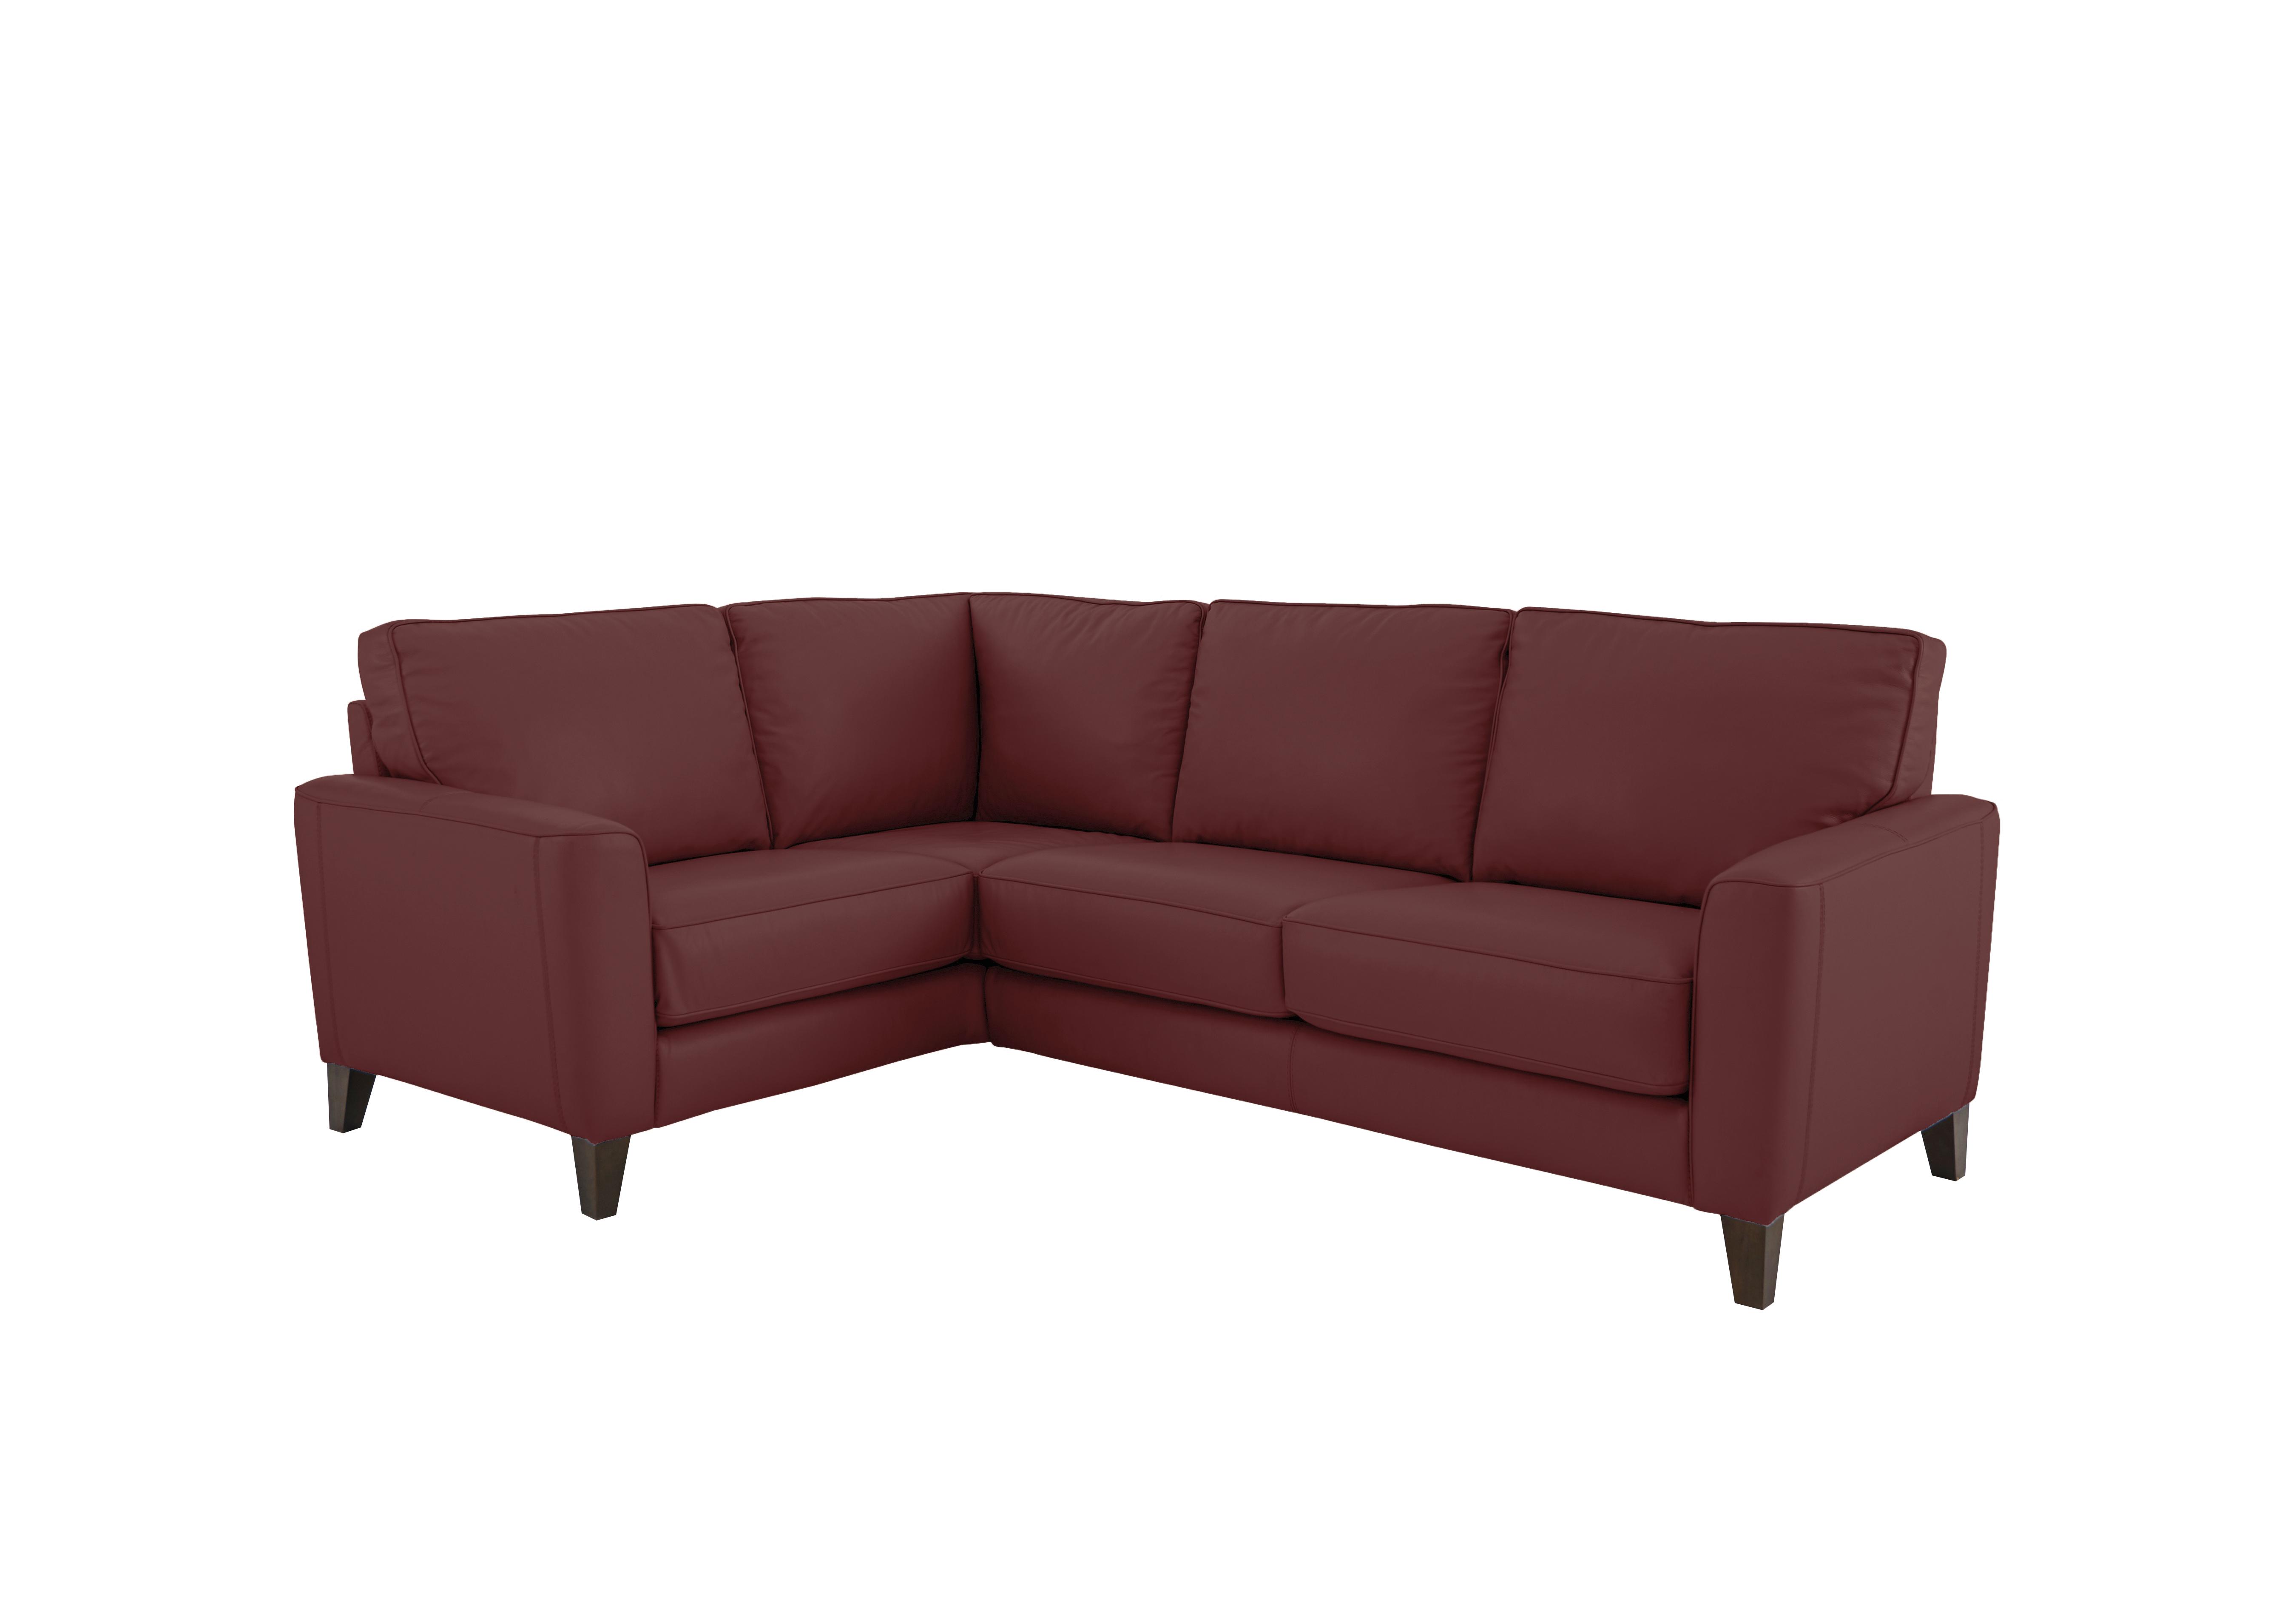 Brondby Small Leather Corner Sofa in Bv-035c Deep Red on Furniture Village